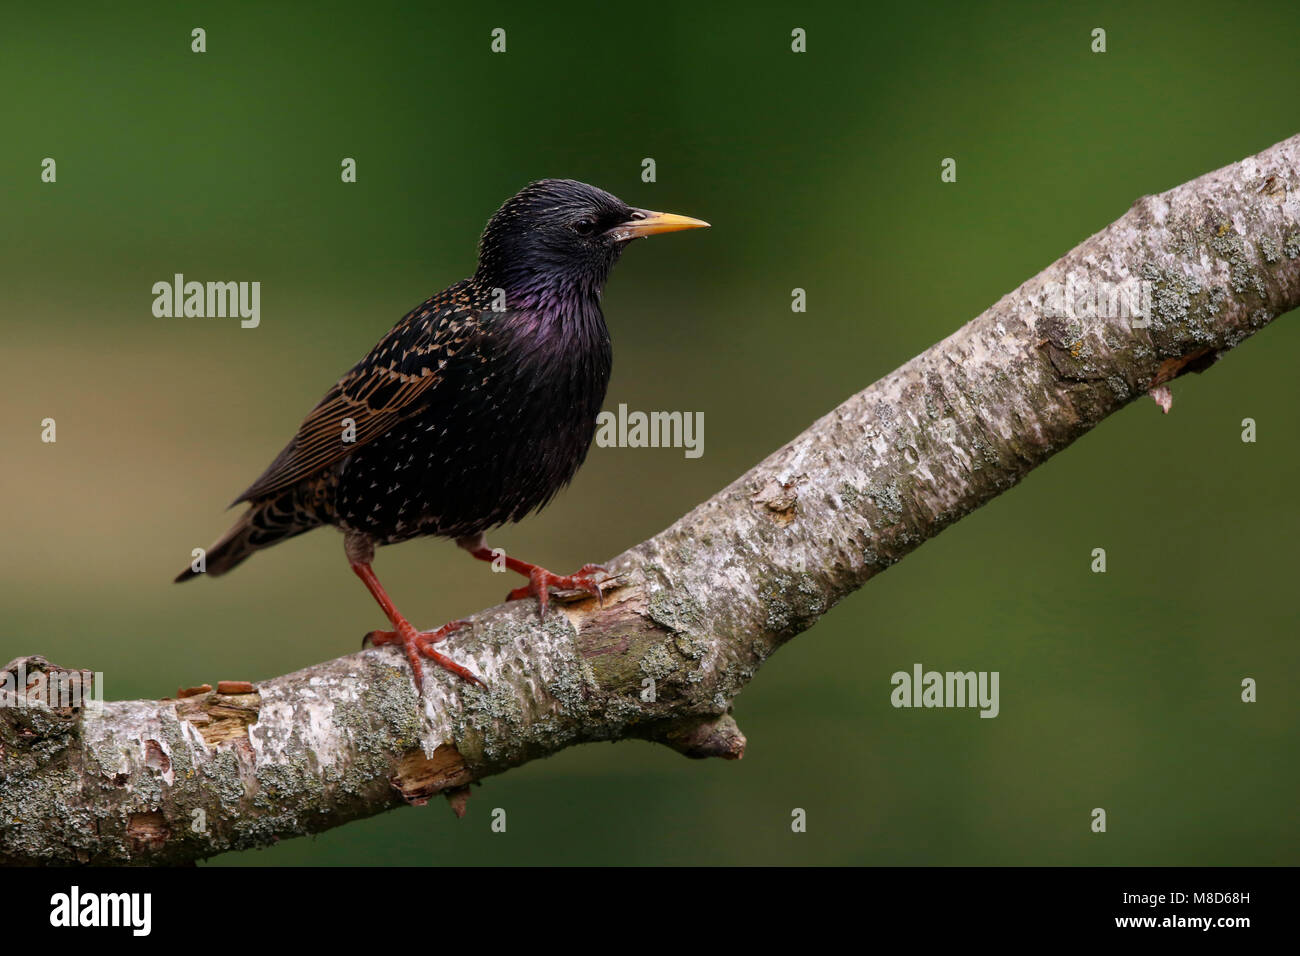 Spreeuw zittend op een tak; Common Starling perched on a branch Stock Photo